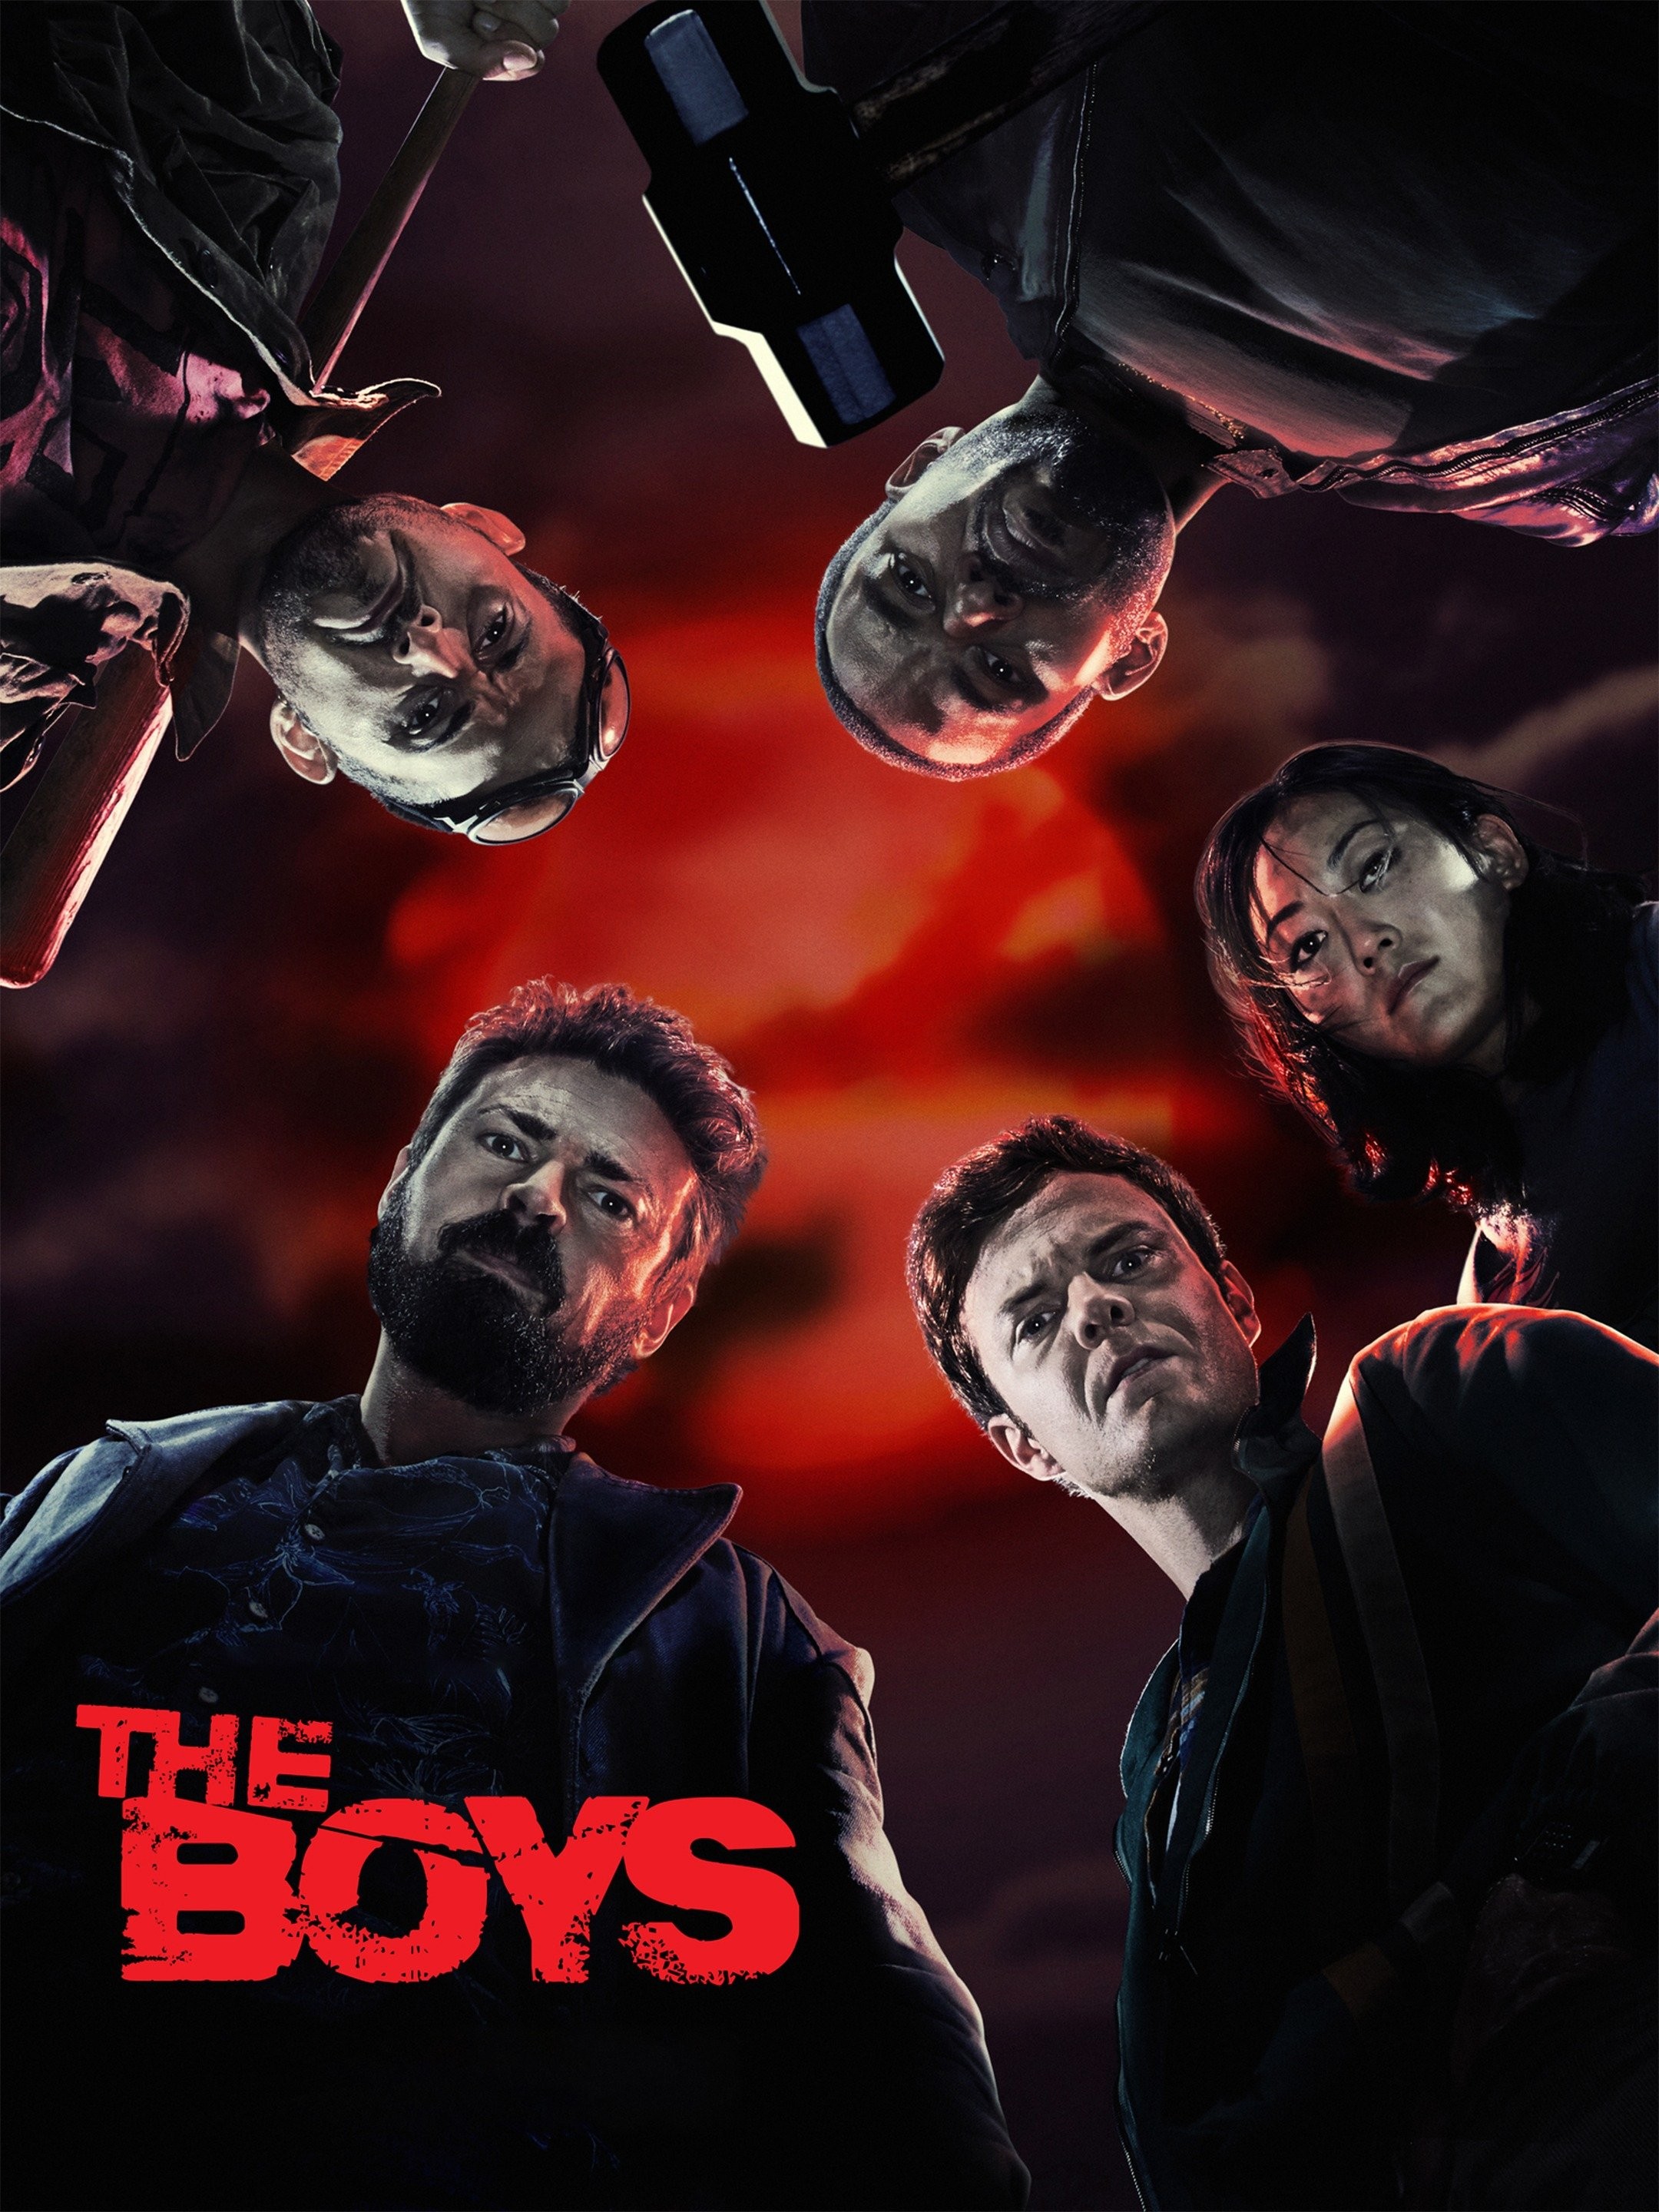 The Boys: Parents Guide & Age Rating for Seasons 1 & 2